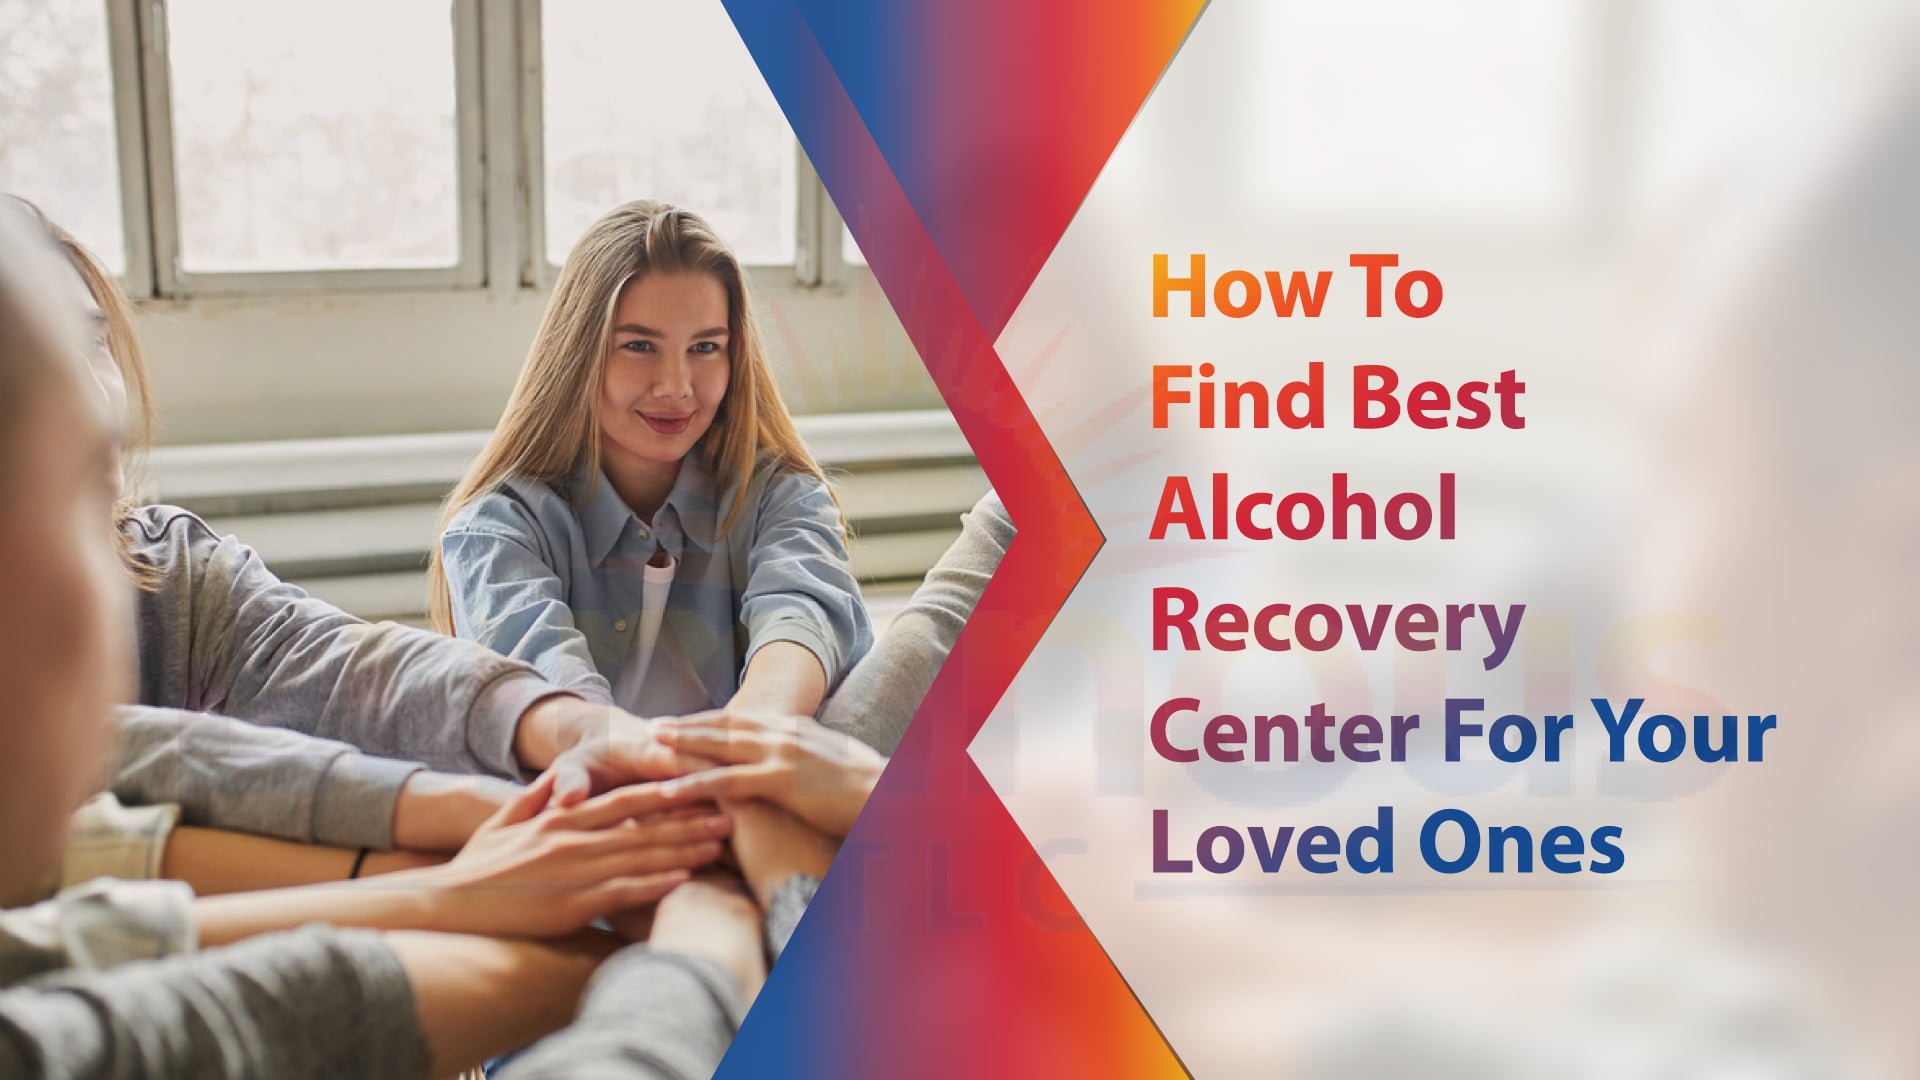 How To Find Best Alcohol Recovery Center For Your Loved Ones